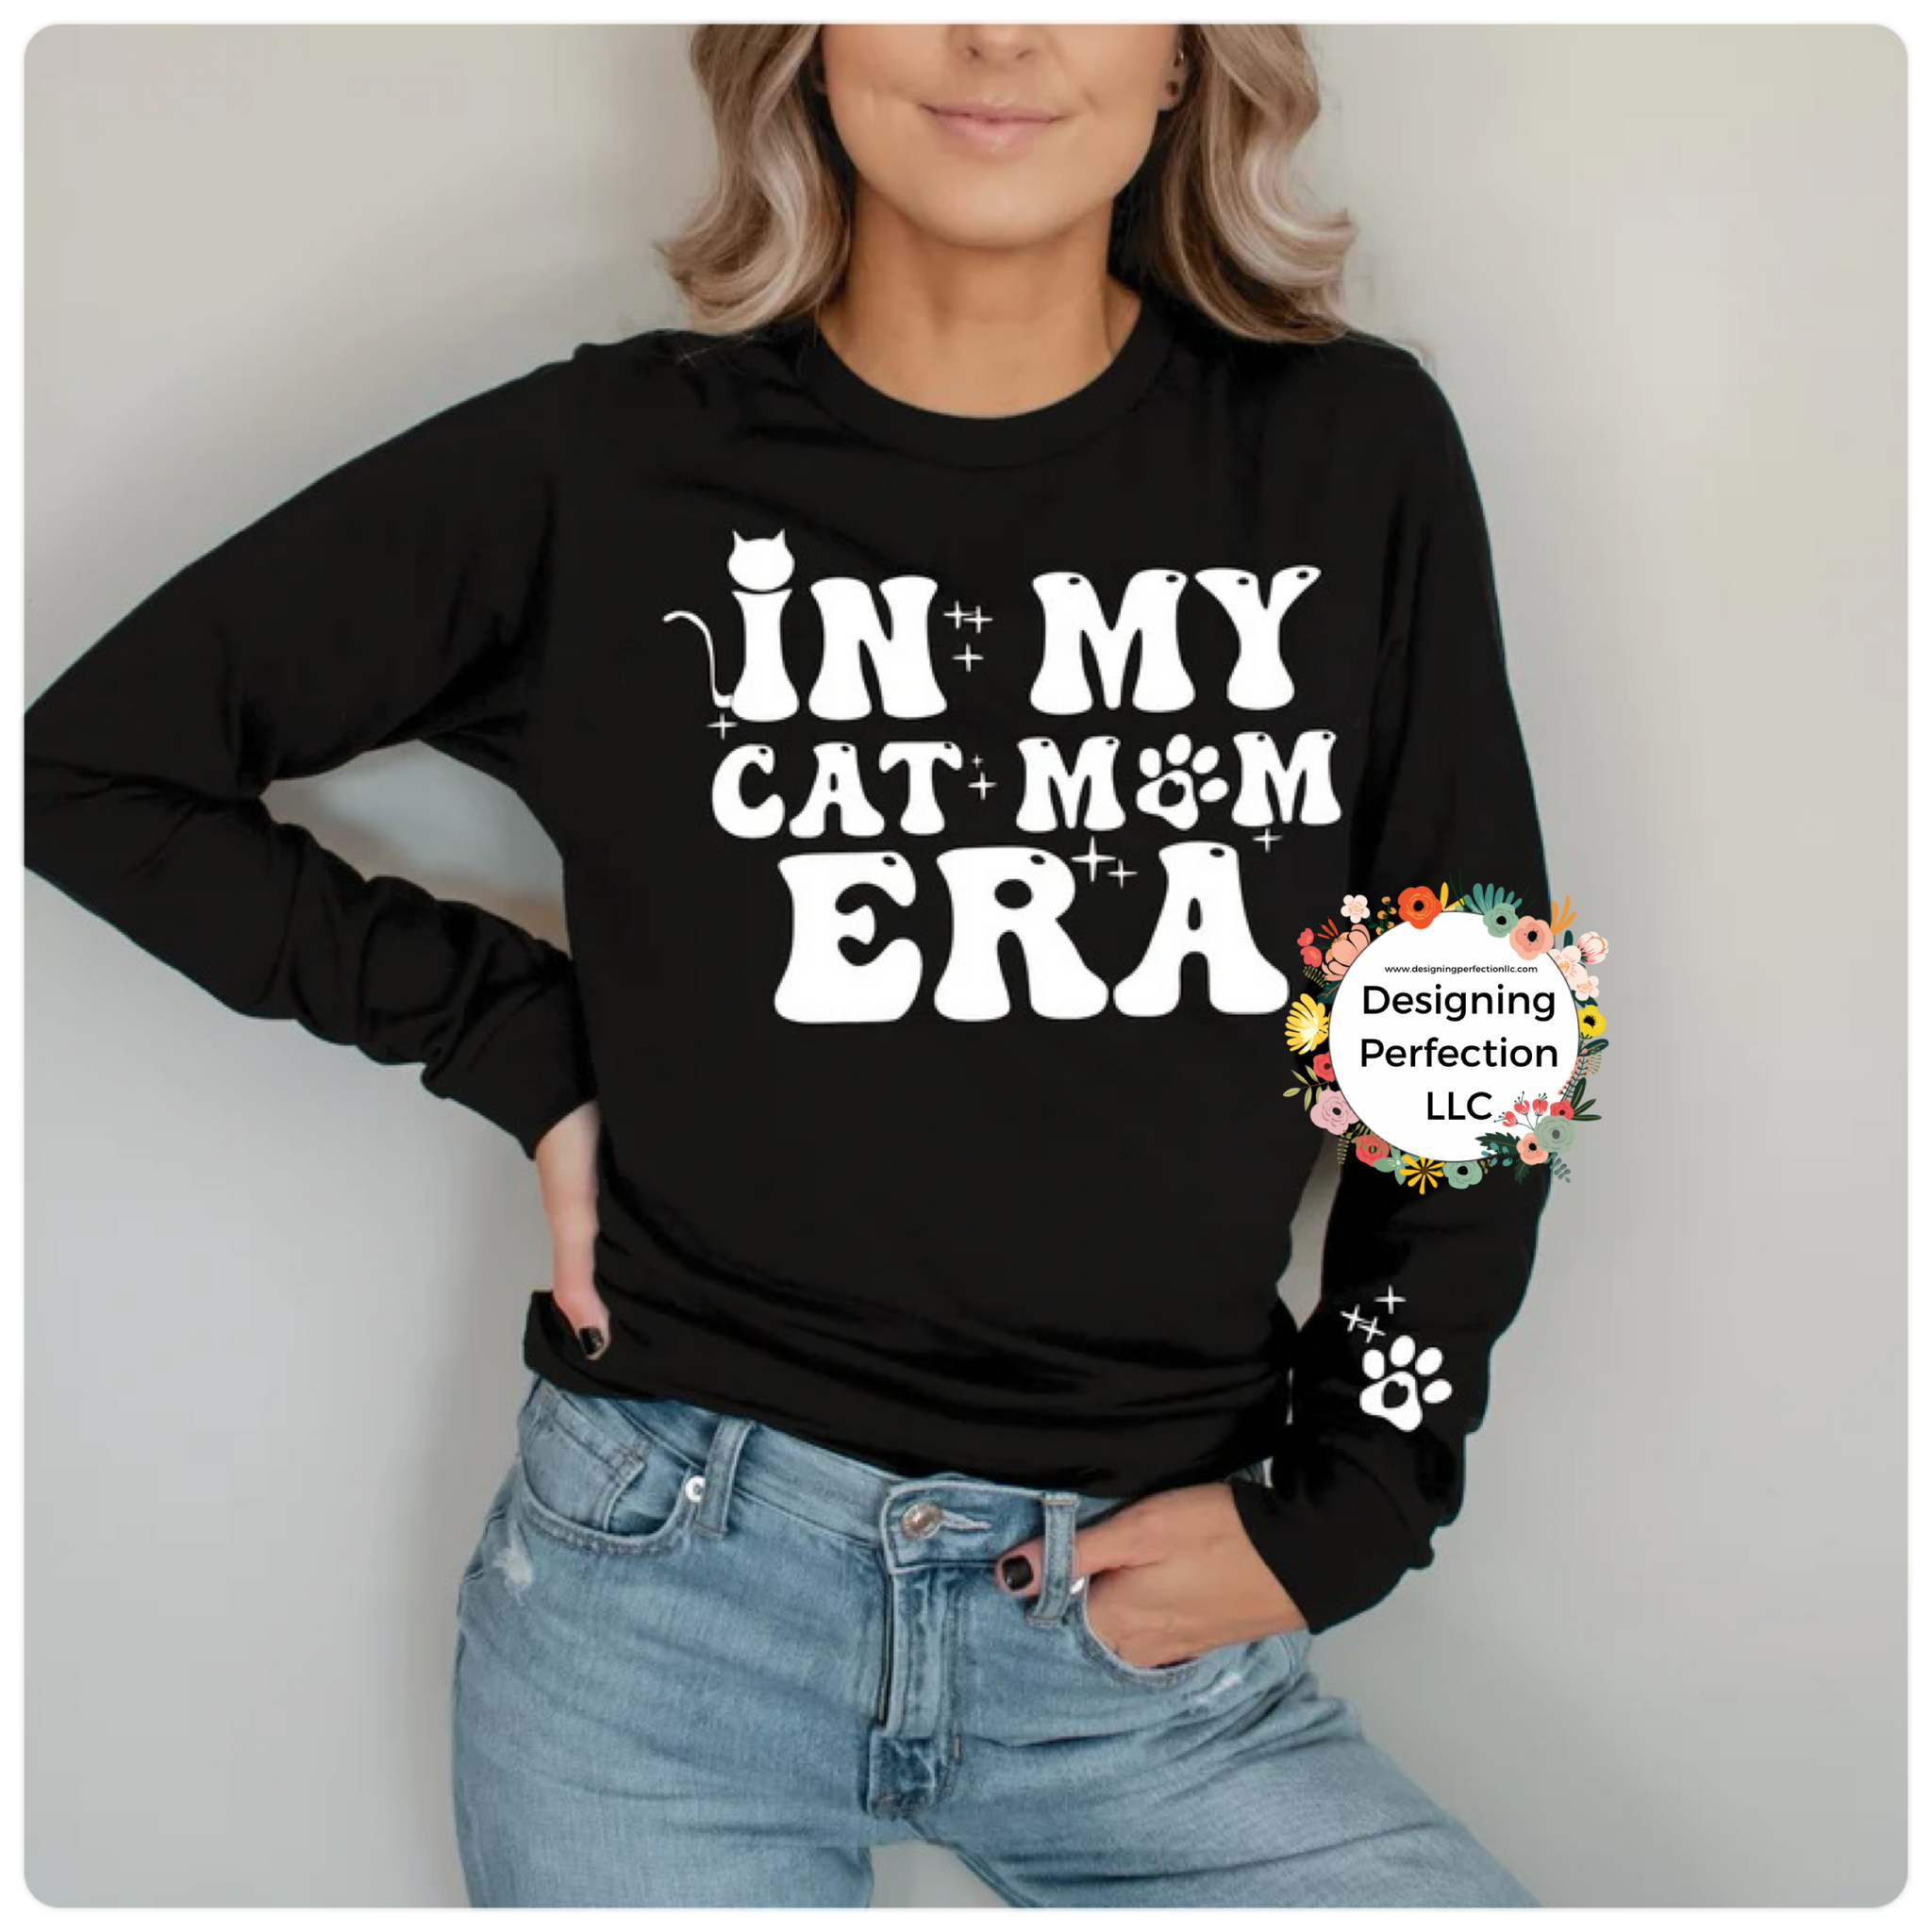 In my cat mom era - priced for tee, additional options in dropdown